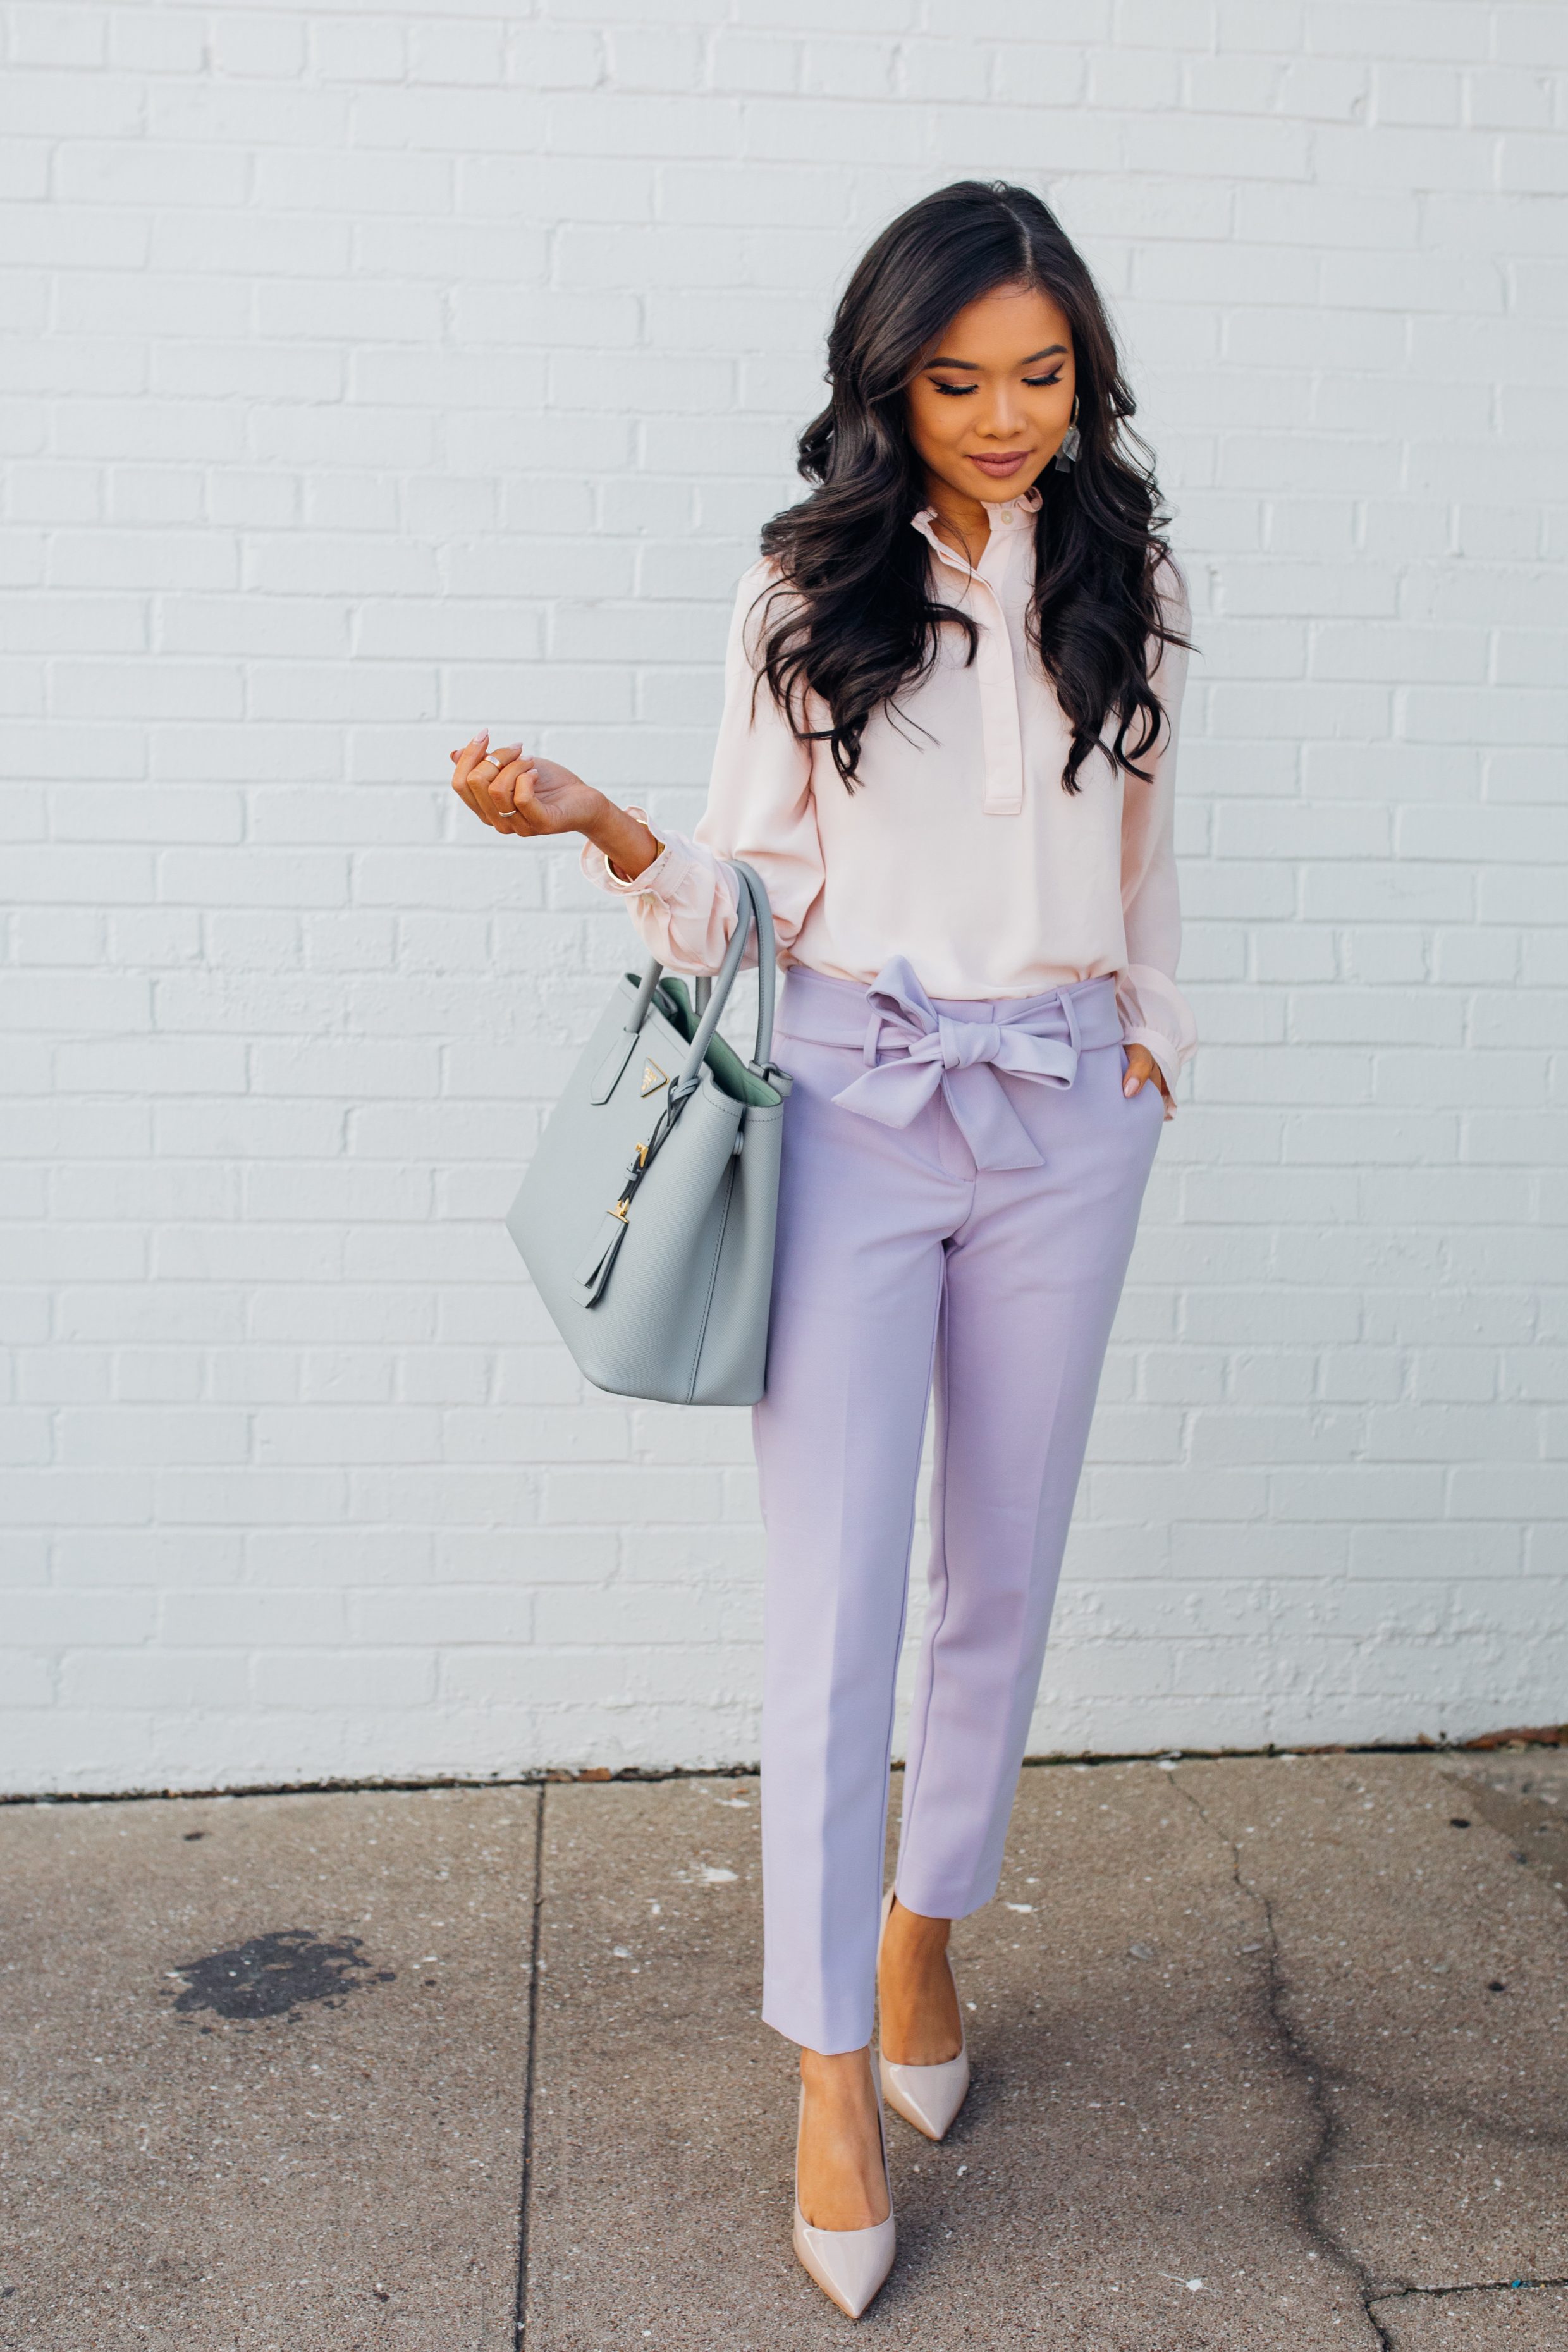 Petite blogger Hoang-Kim wears a blush henley with lavender tie-waist pants from LOFT